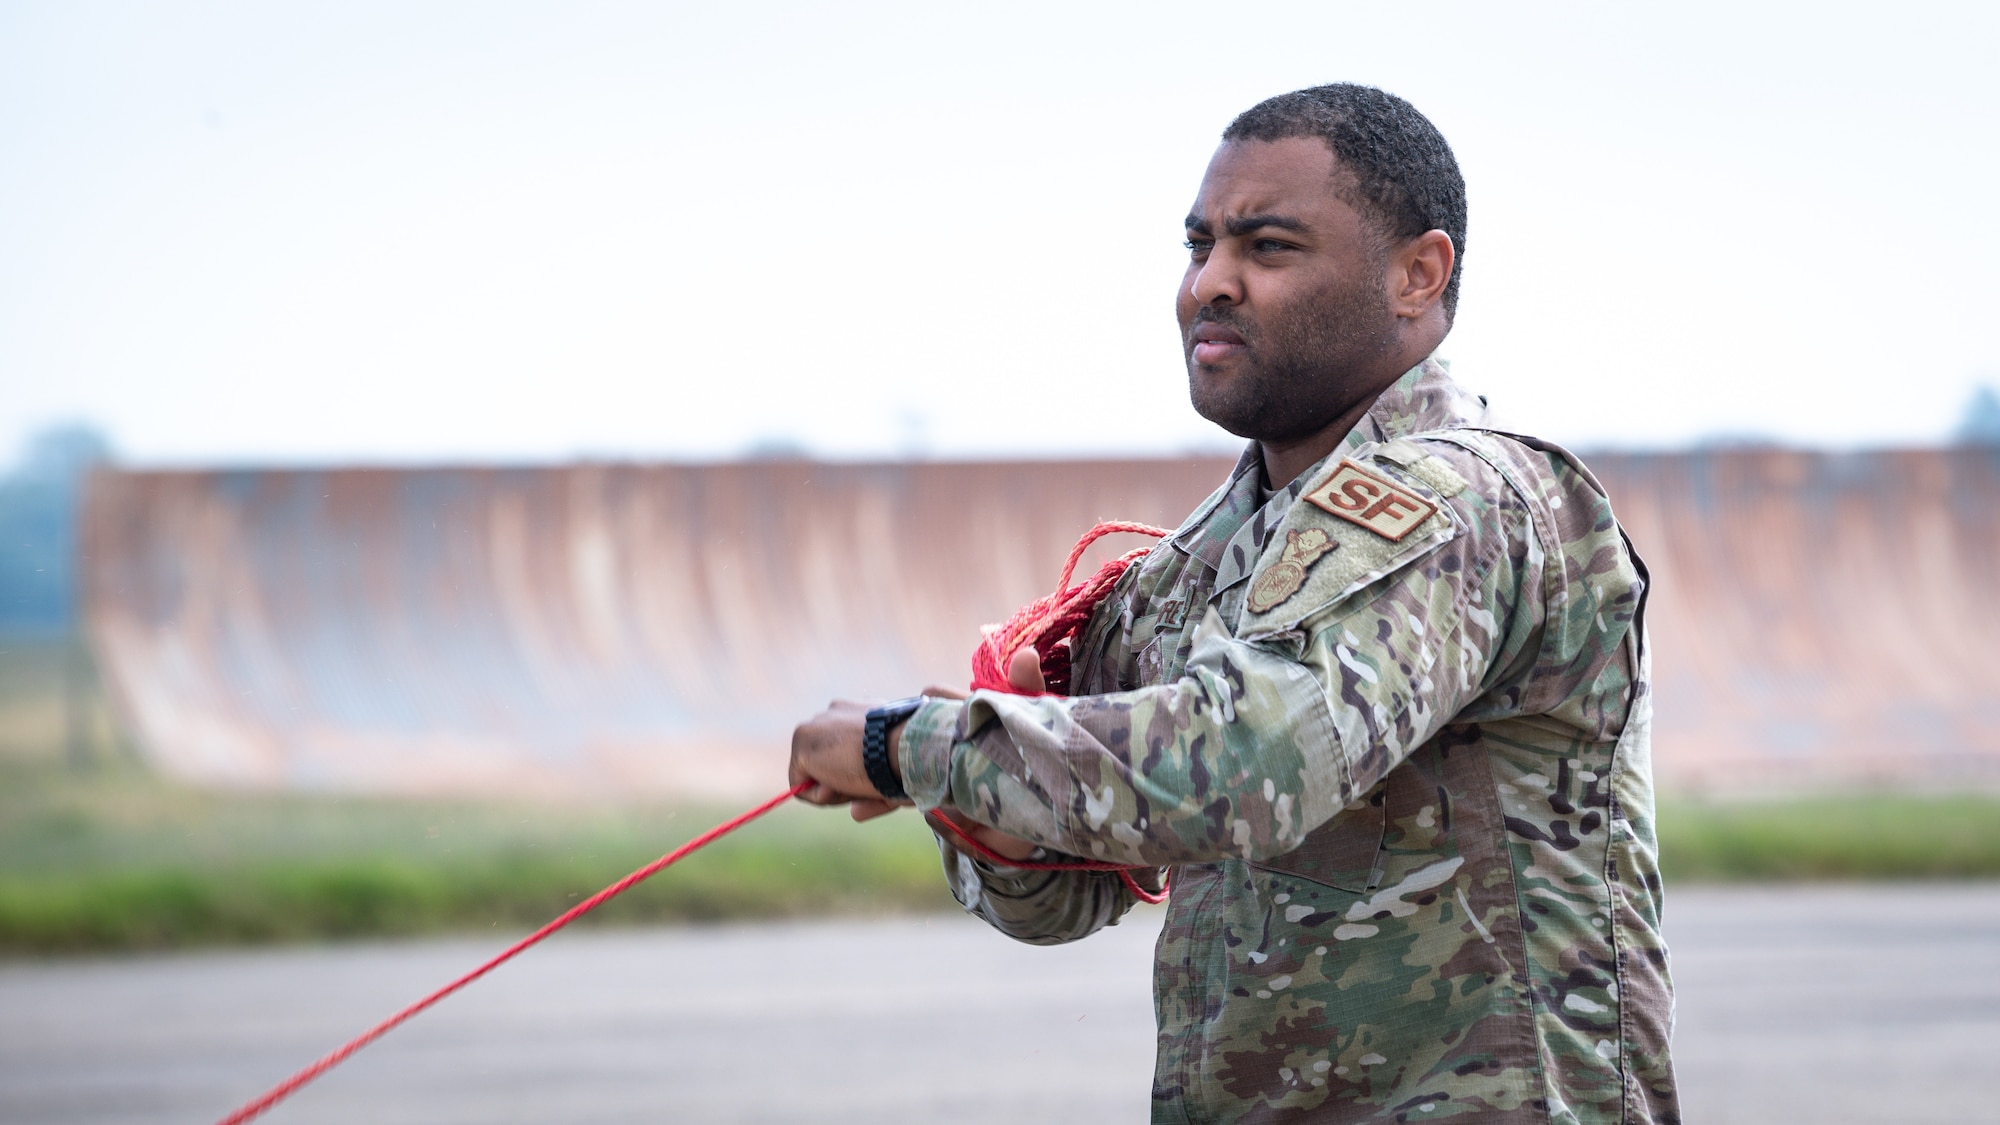 Staff Sgt. Dijon Moore, 2nd Security Forces Squadron vehicle control officer, winds rope while setting up for Global Thunder 21 at Barksdale Air Force Base, La., Oct. 20, 2020.